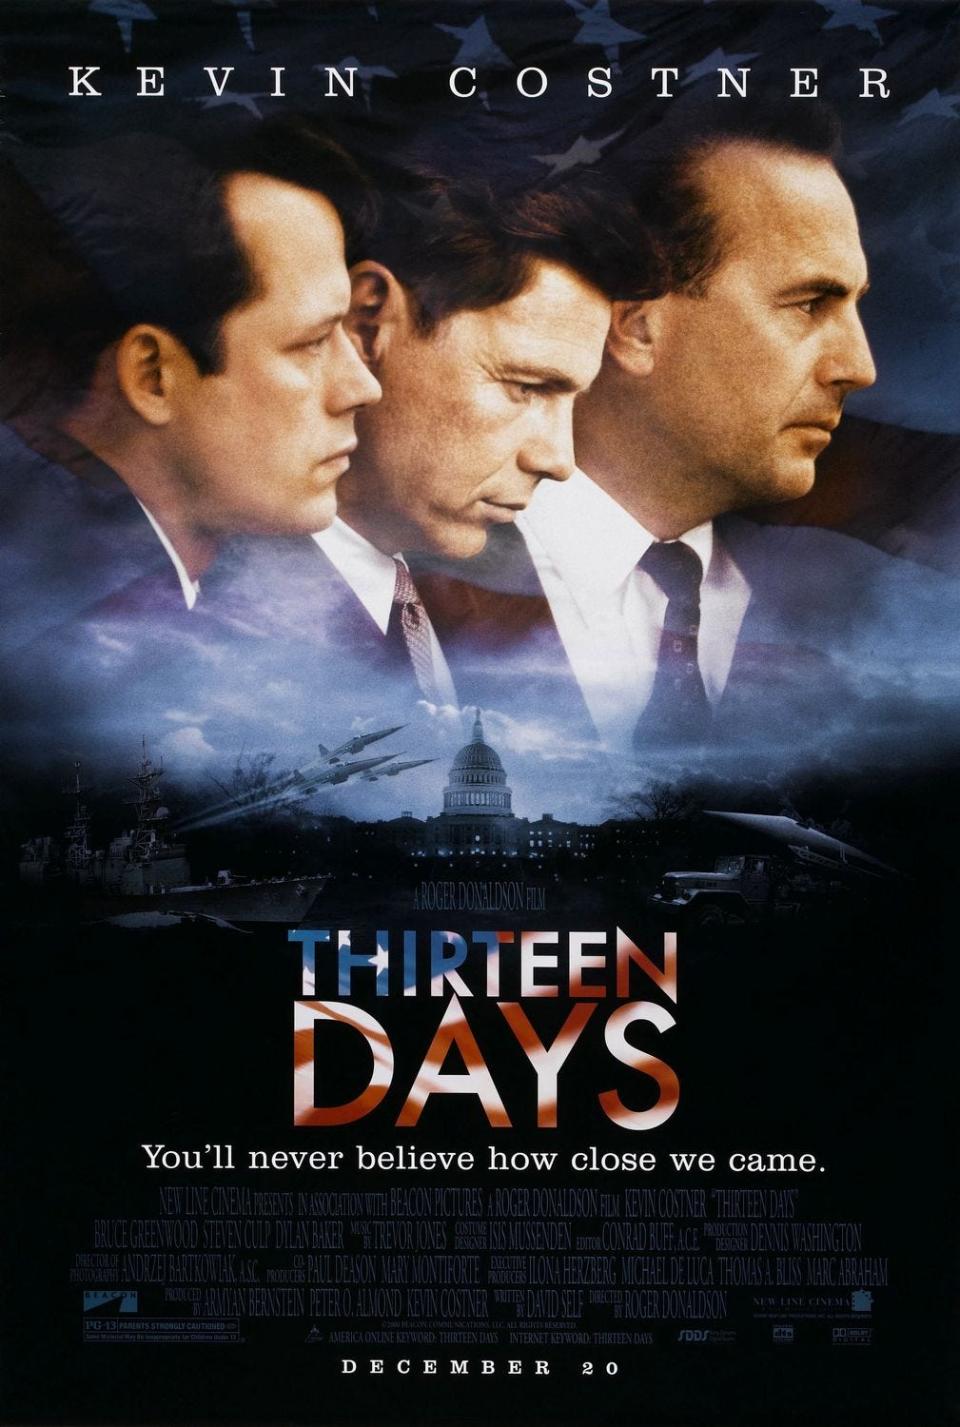 A movie poster for the film "Thirteen Days."